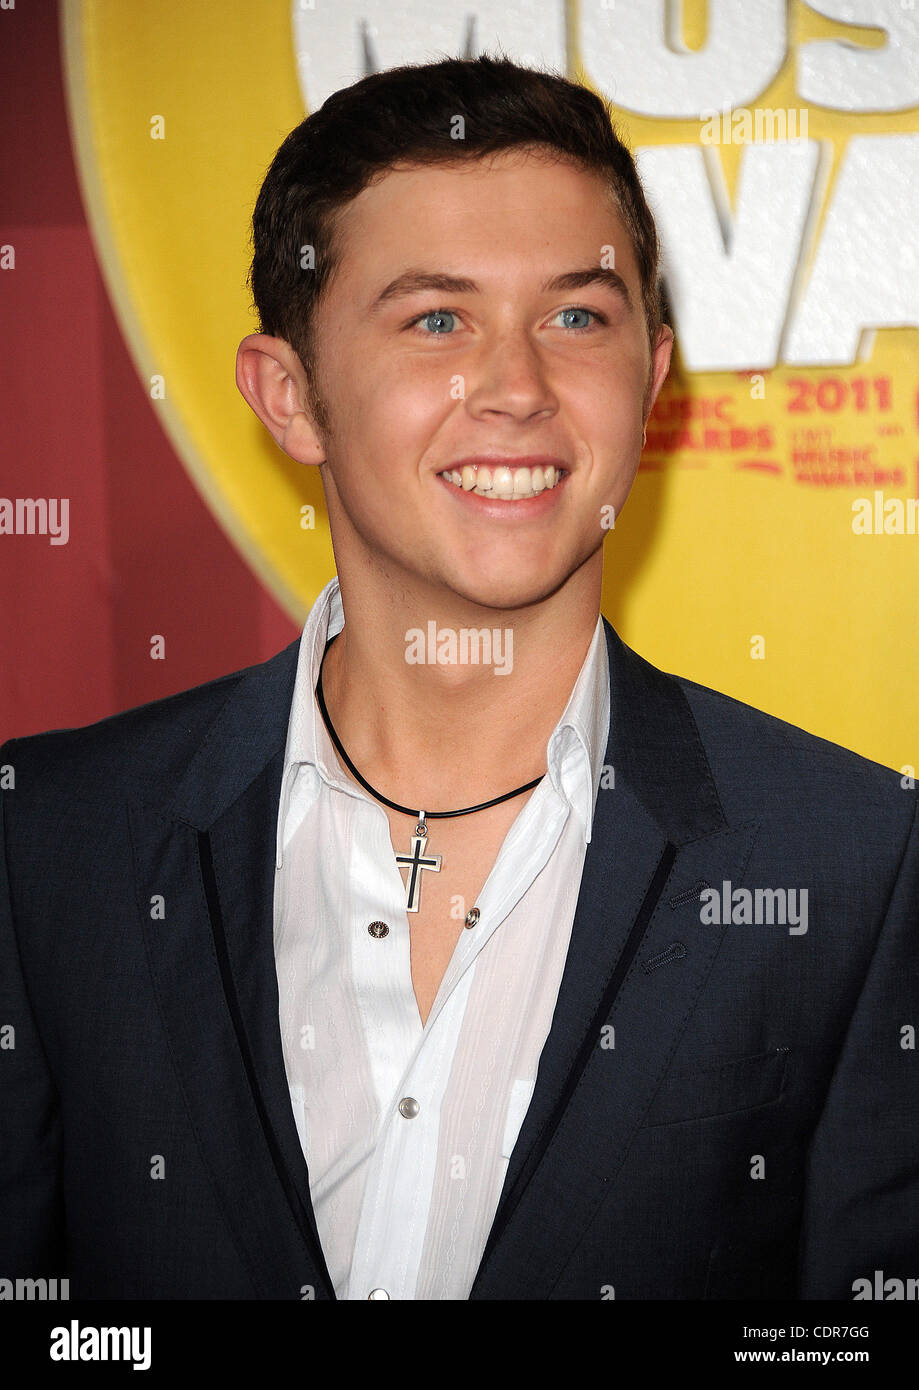 Jun 8, 2011 - Nashville, Tennessee; USA - American Idol Winner SCOTTY MCCREERY arrives on the red carpet at the 2011 CMT Music Awards that took place at the Bridgestone Arena located in downtown Nashville.  Copyright 2011 Jason Moore. (Credit Image: © Jason Moore/ZUMAPRESS.com) Stock Photo